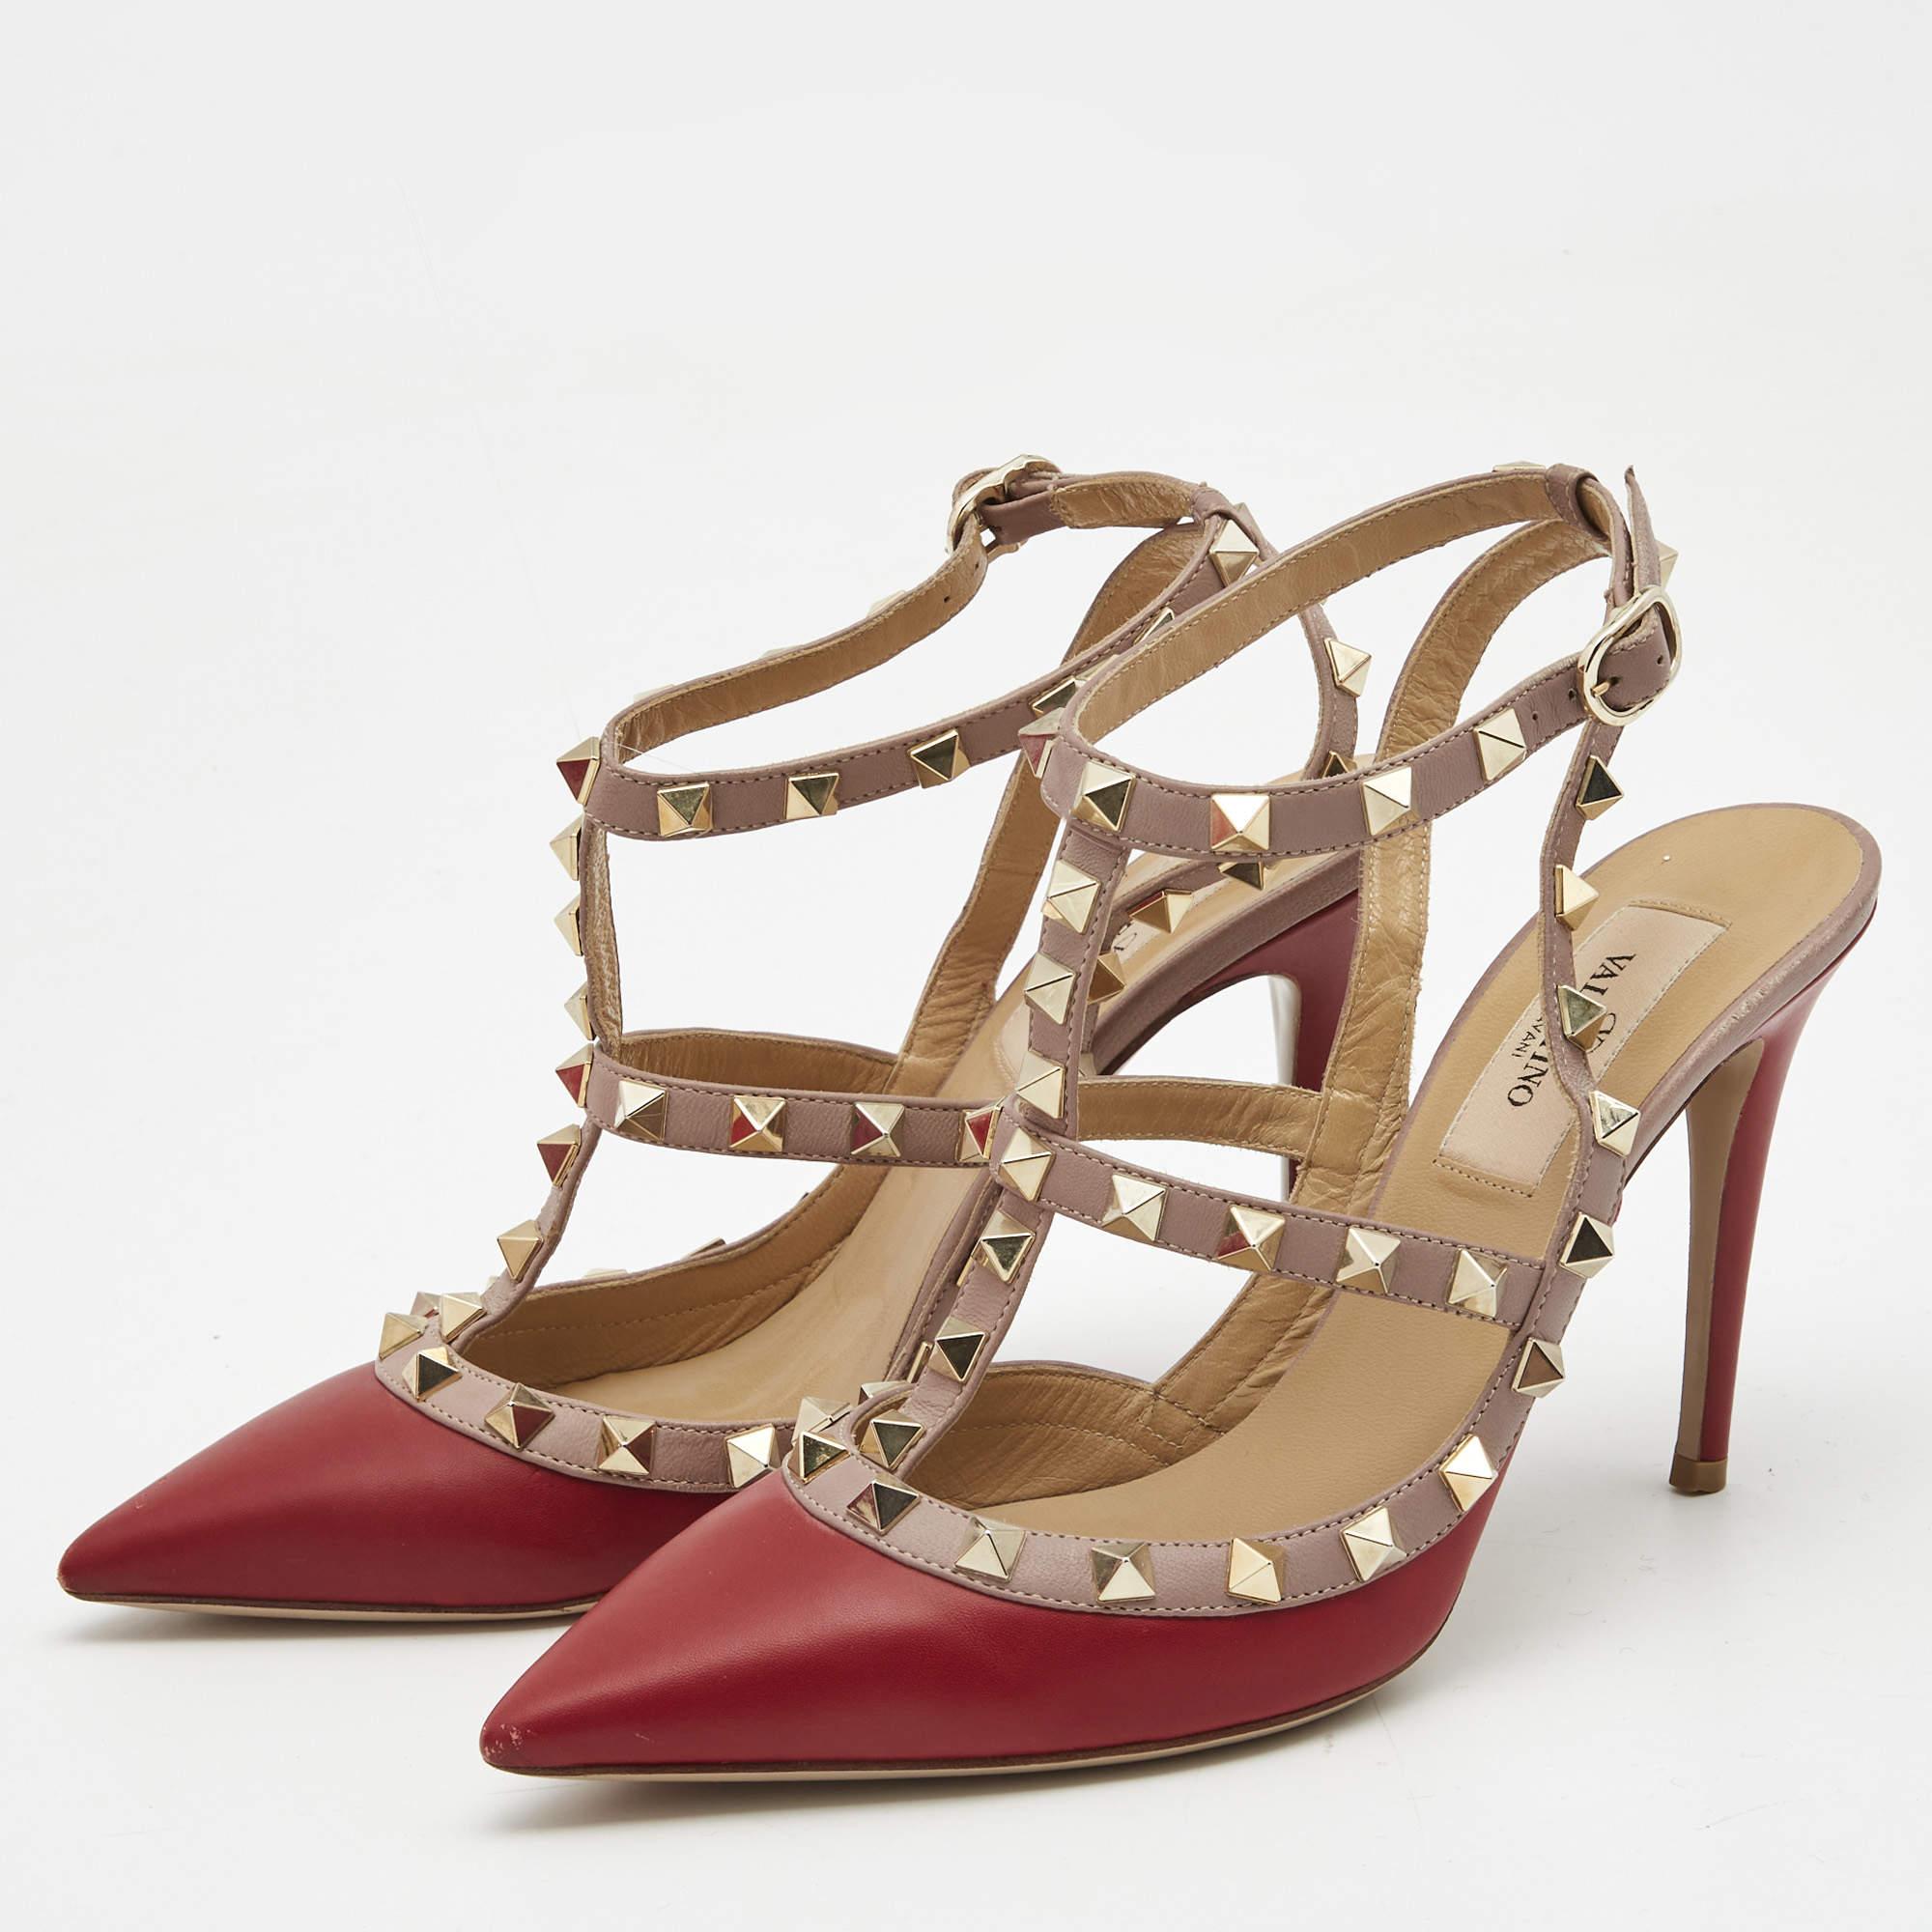 Valentino Red Leather Rockstud Ankle Strap Pumps Size 36.5 3